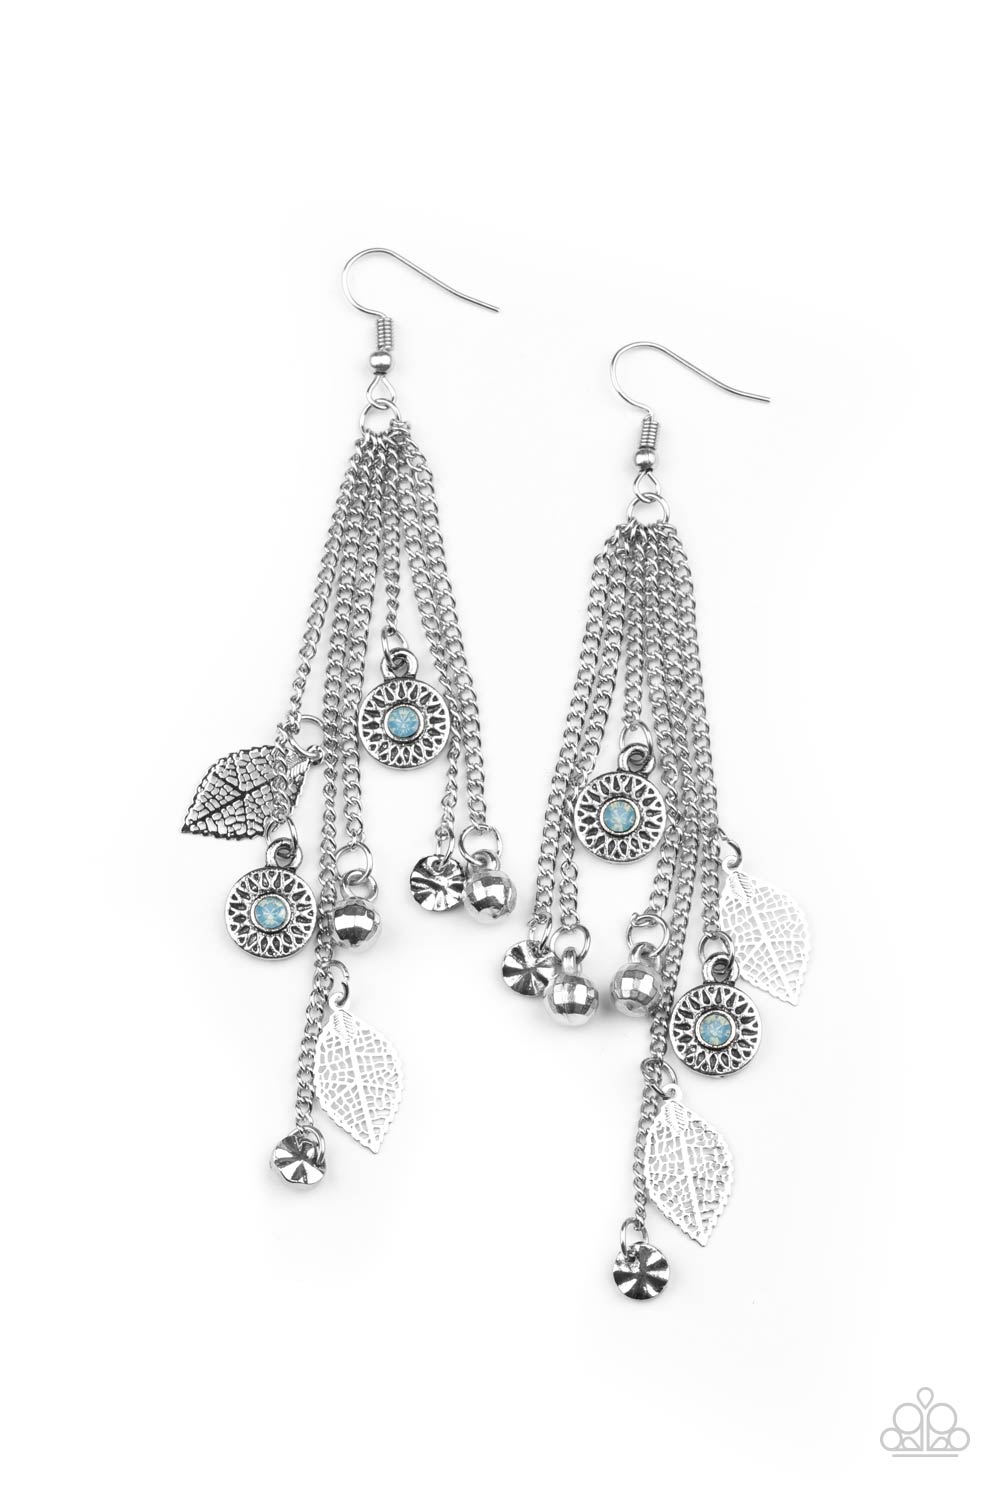 A Natural Charmer Blue Earring - Paparazzi Accessories. Dewy Cerulean rhinestone dotted frames, airy silver leaves, silver disco ball-like beads stream from the bottoms of dainty silver chains, creating a whimsically tasseled display. Earring attaches to a standard fishhook fitting.  All Paparazzi Accessories are lead free and nickel free!  Sold as one pair of earrings.